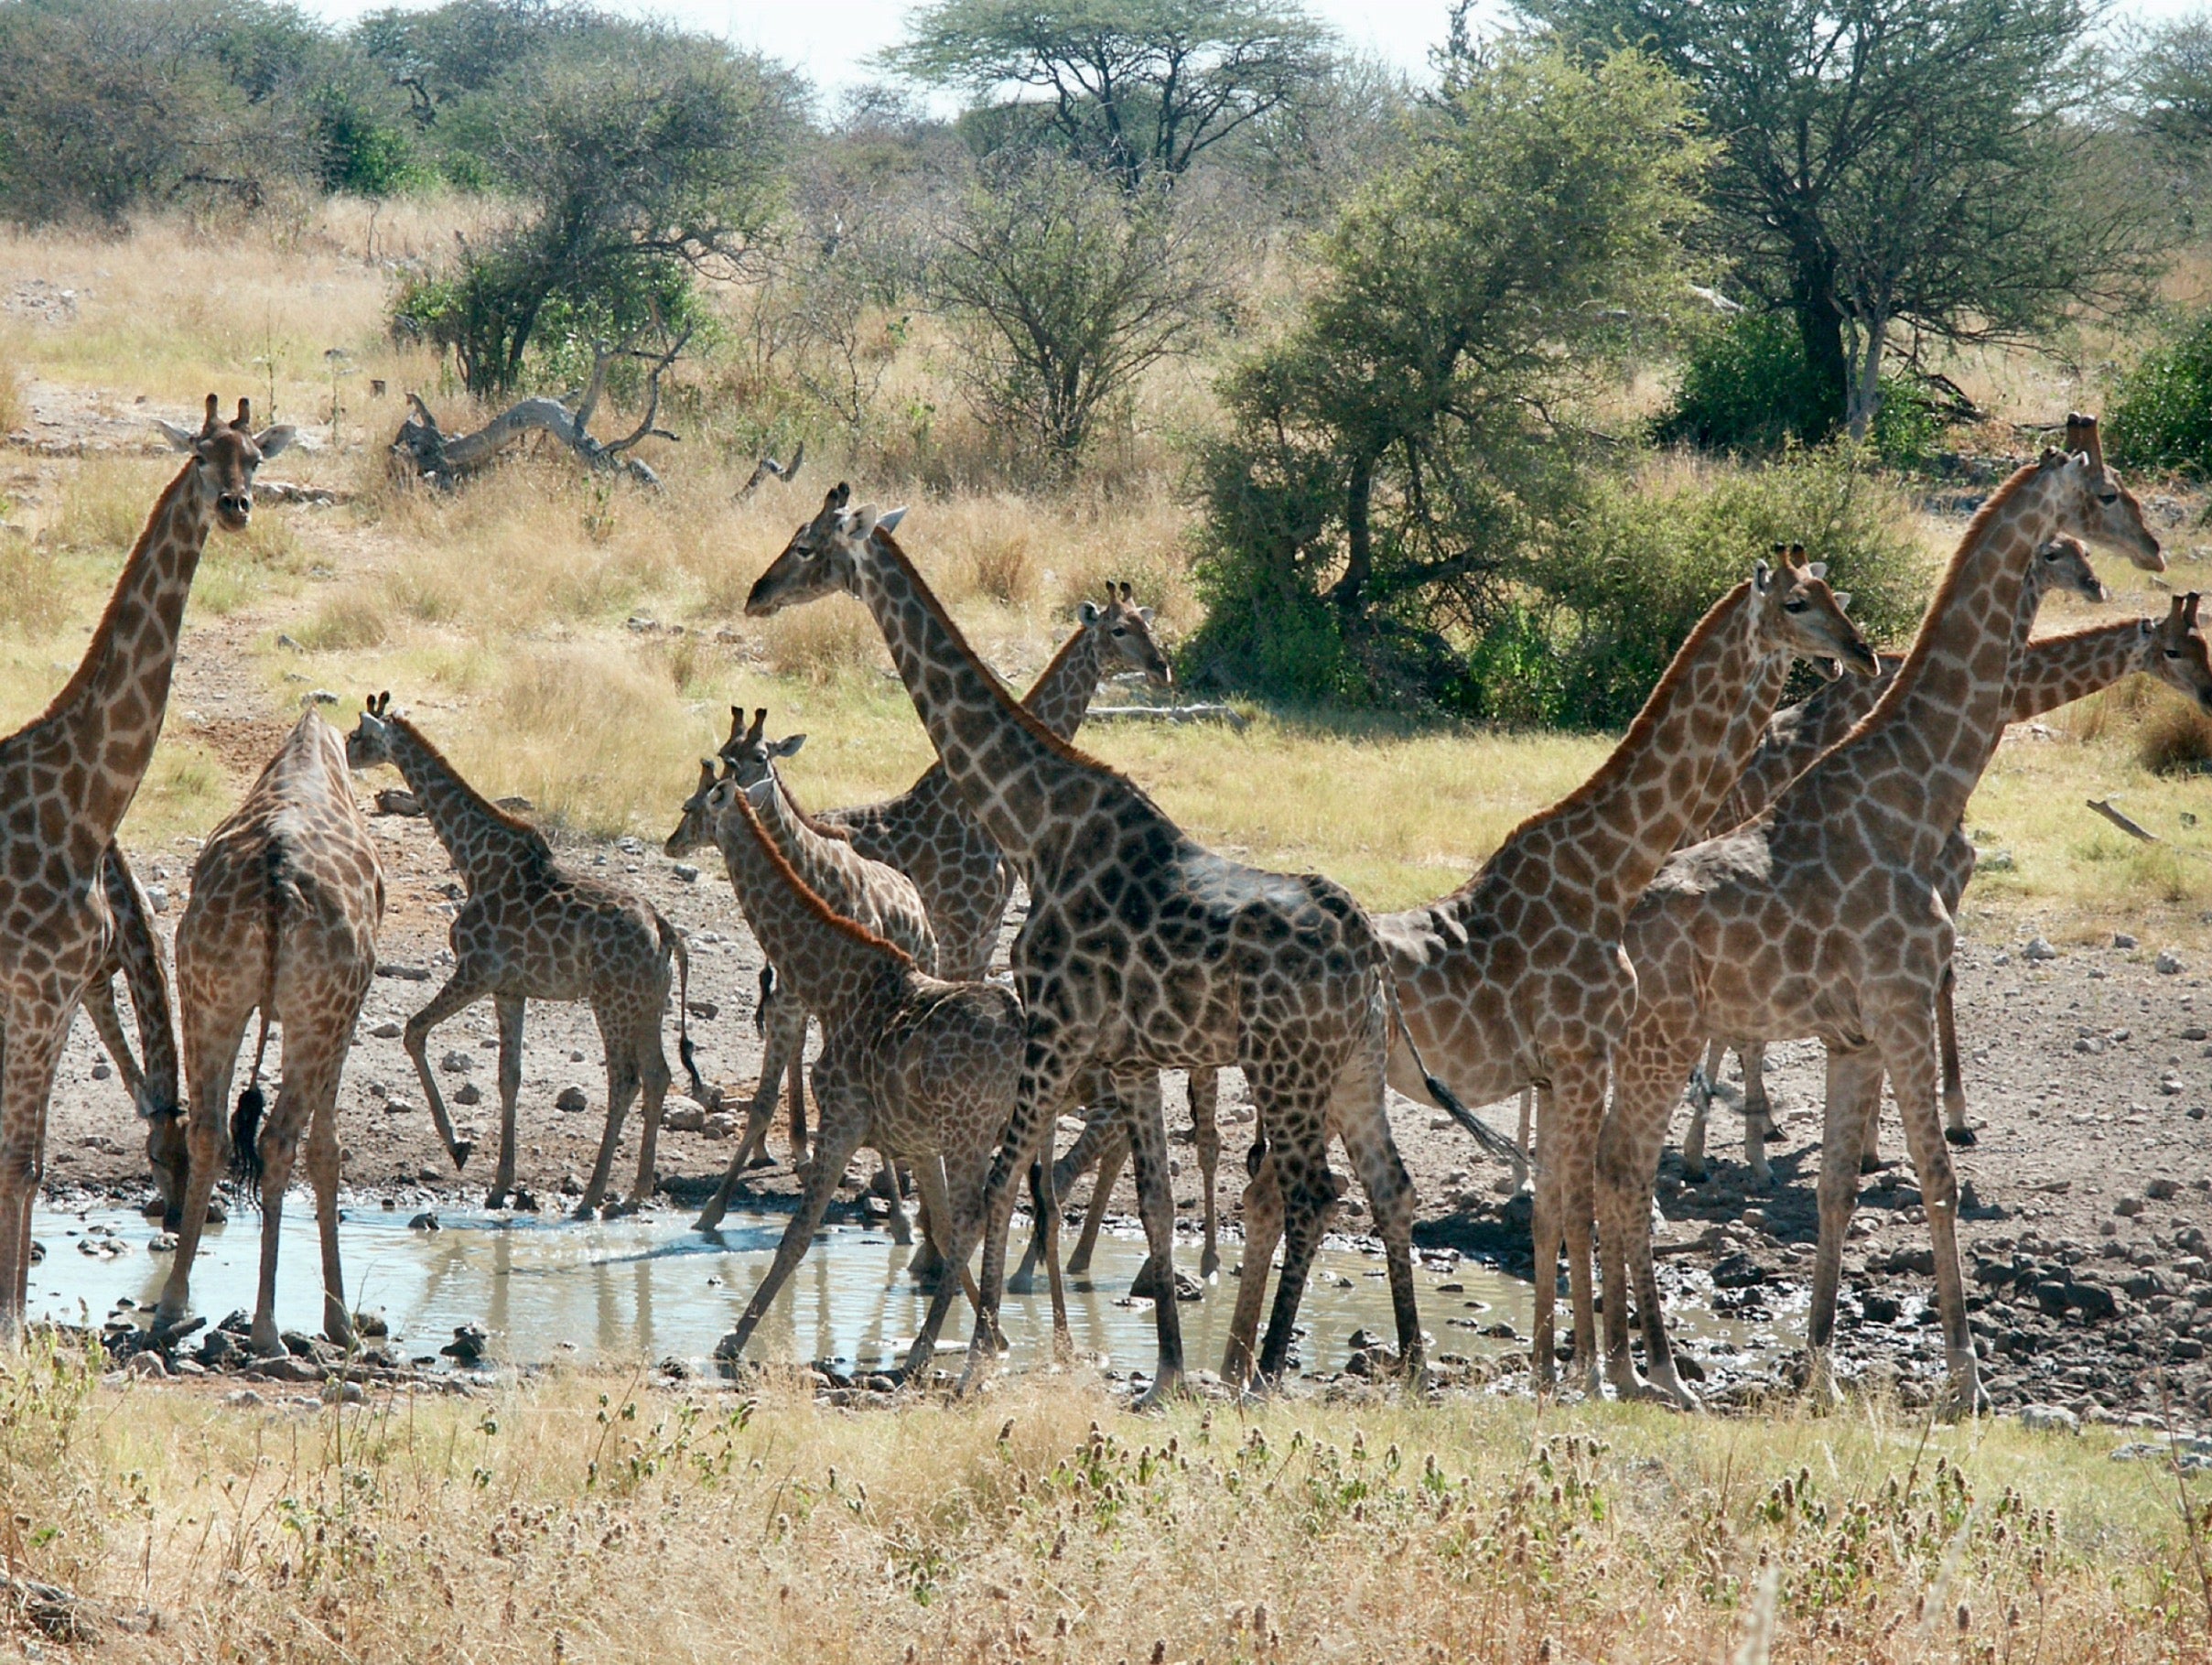 A group of giraffes at a water hole in Namibia